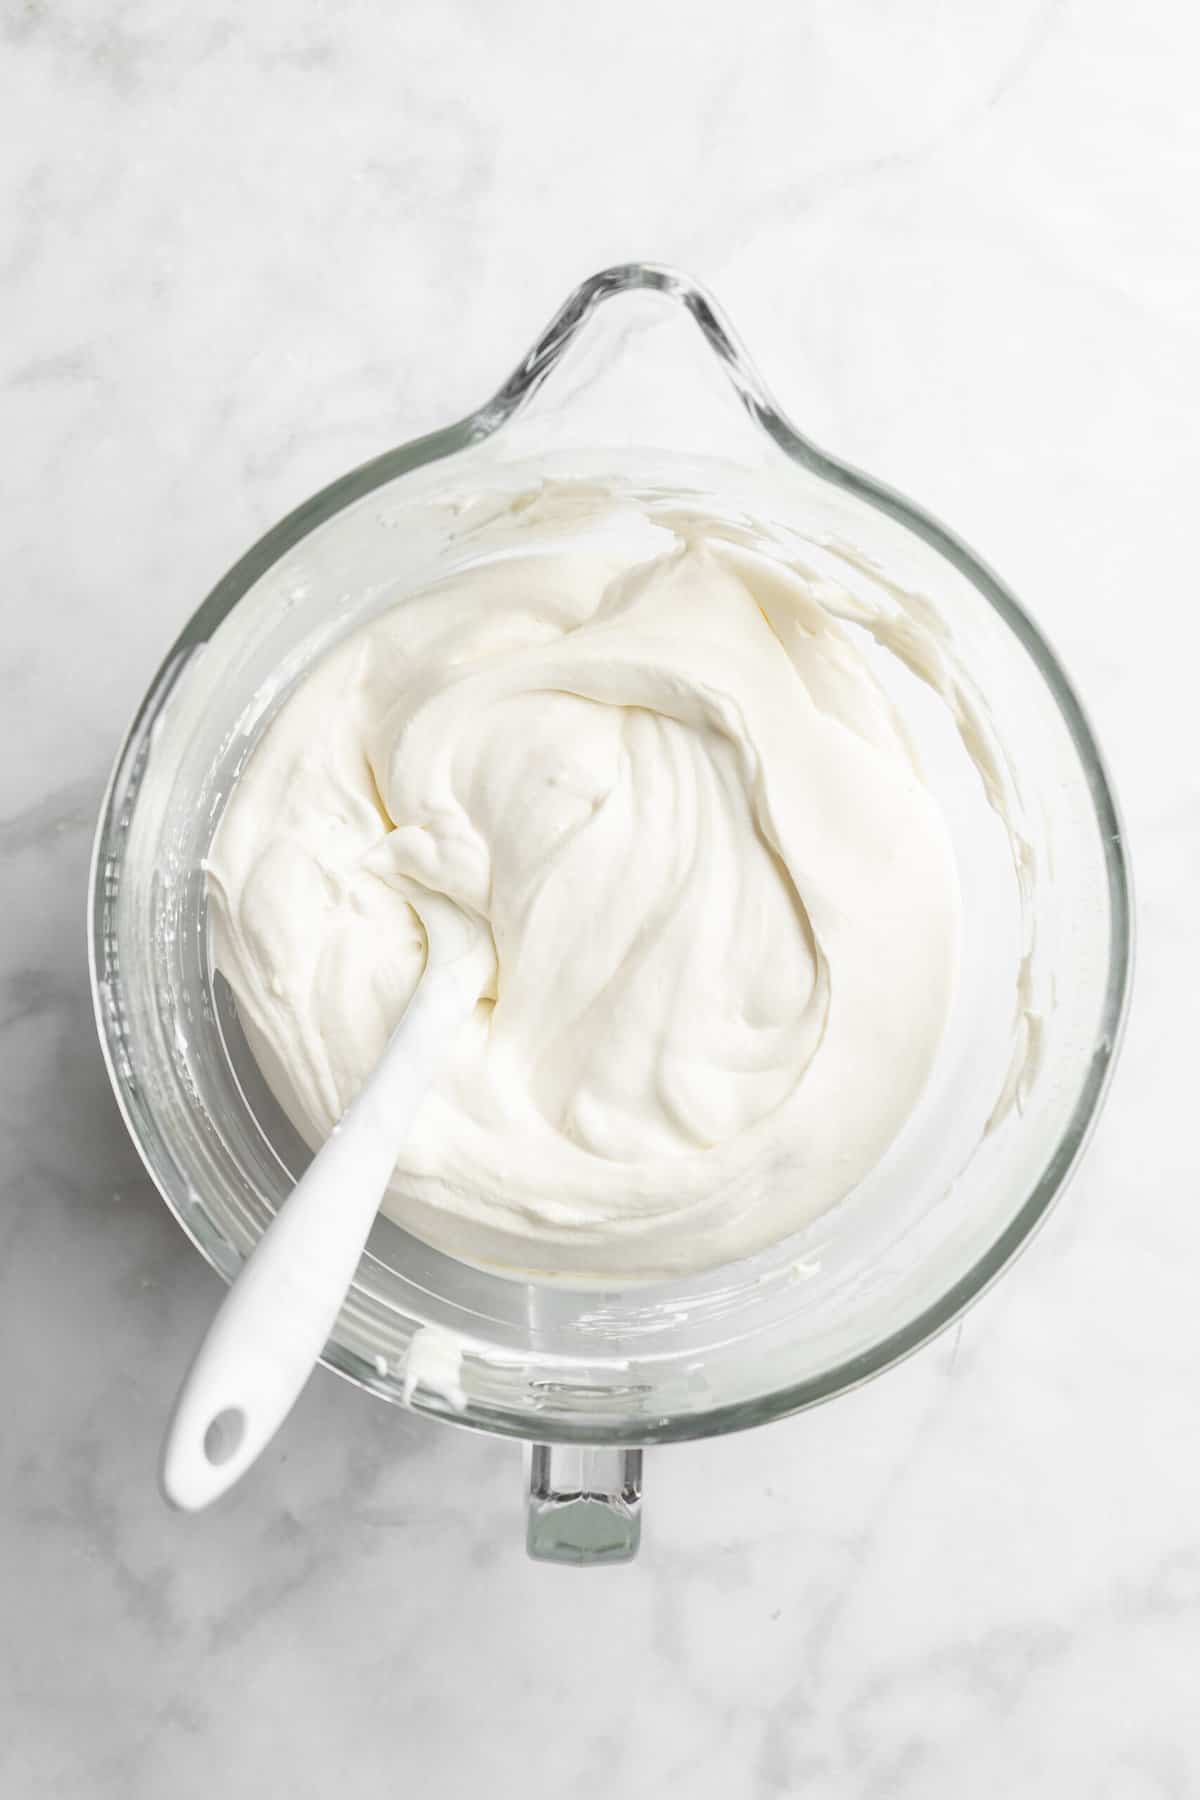 Whipped cream in the glass bowl of a stand mixer.